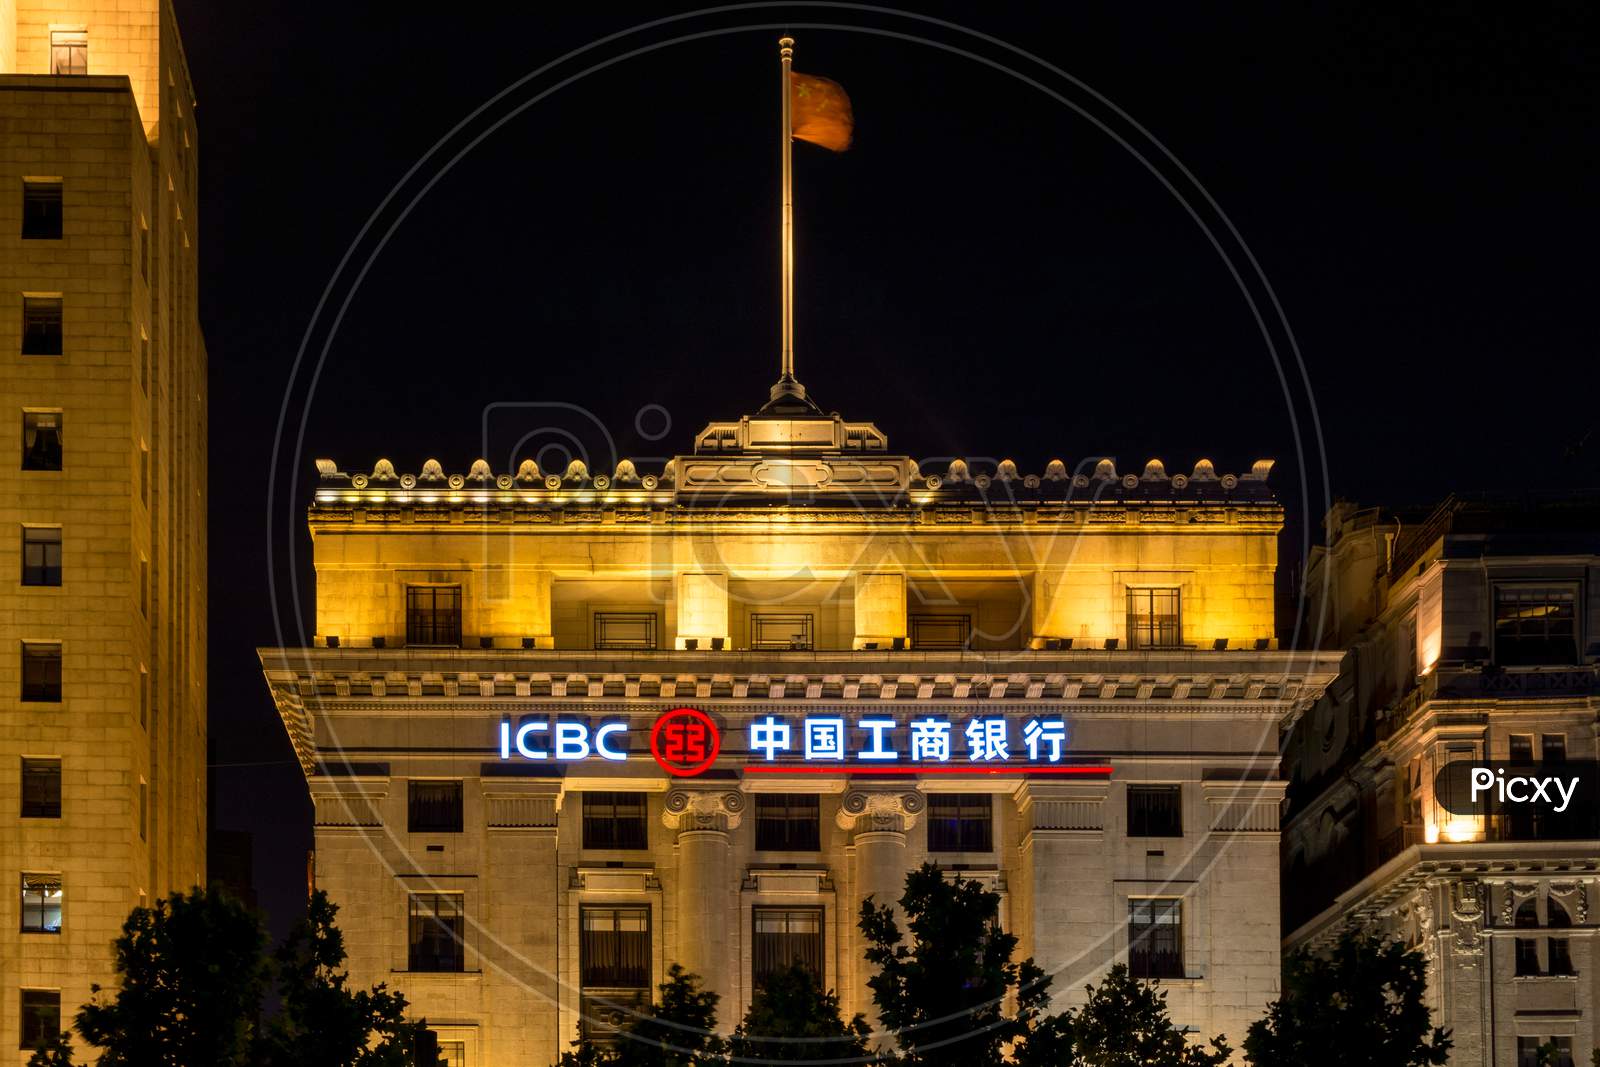 Industrial And Commercial Bank Of China Headquarters In The Bund, Shanghai, China